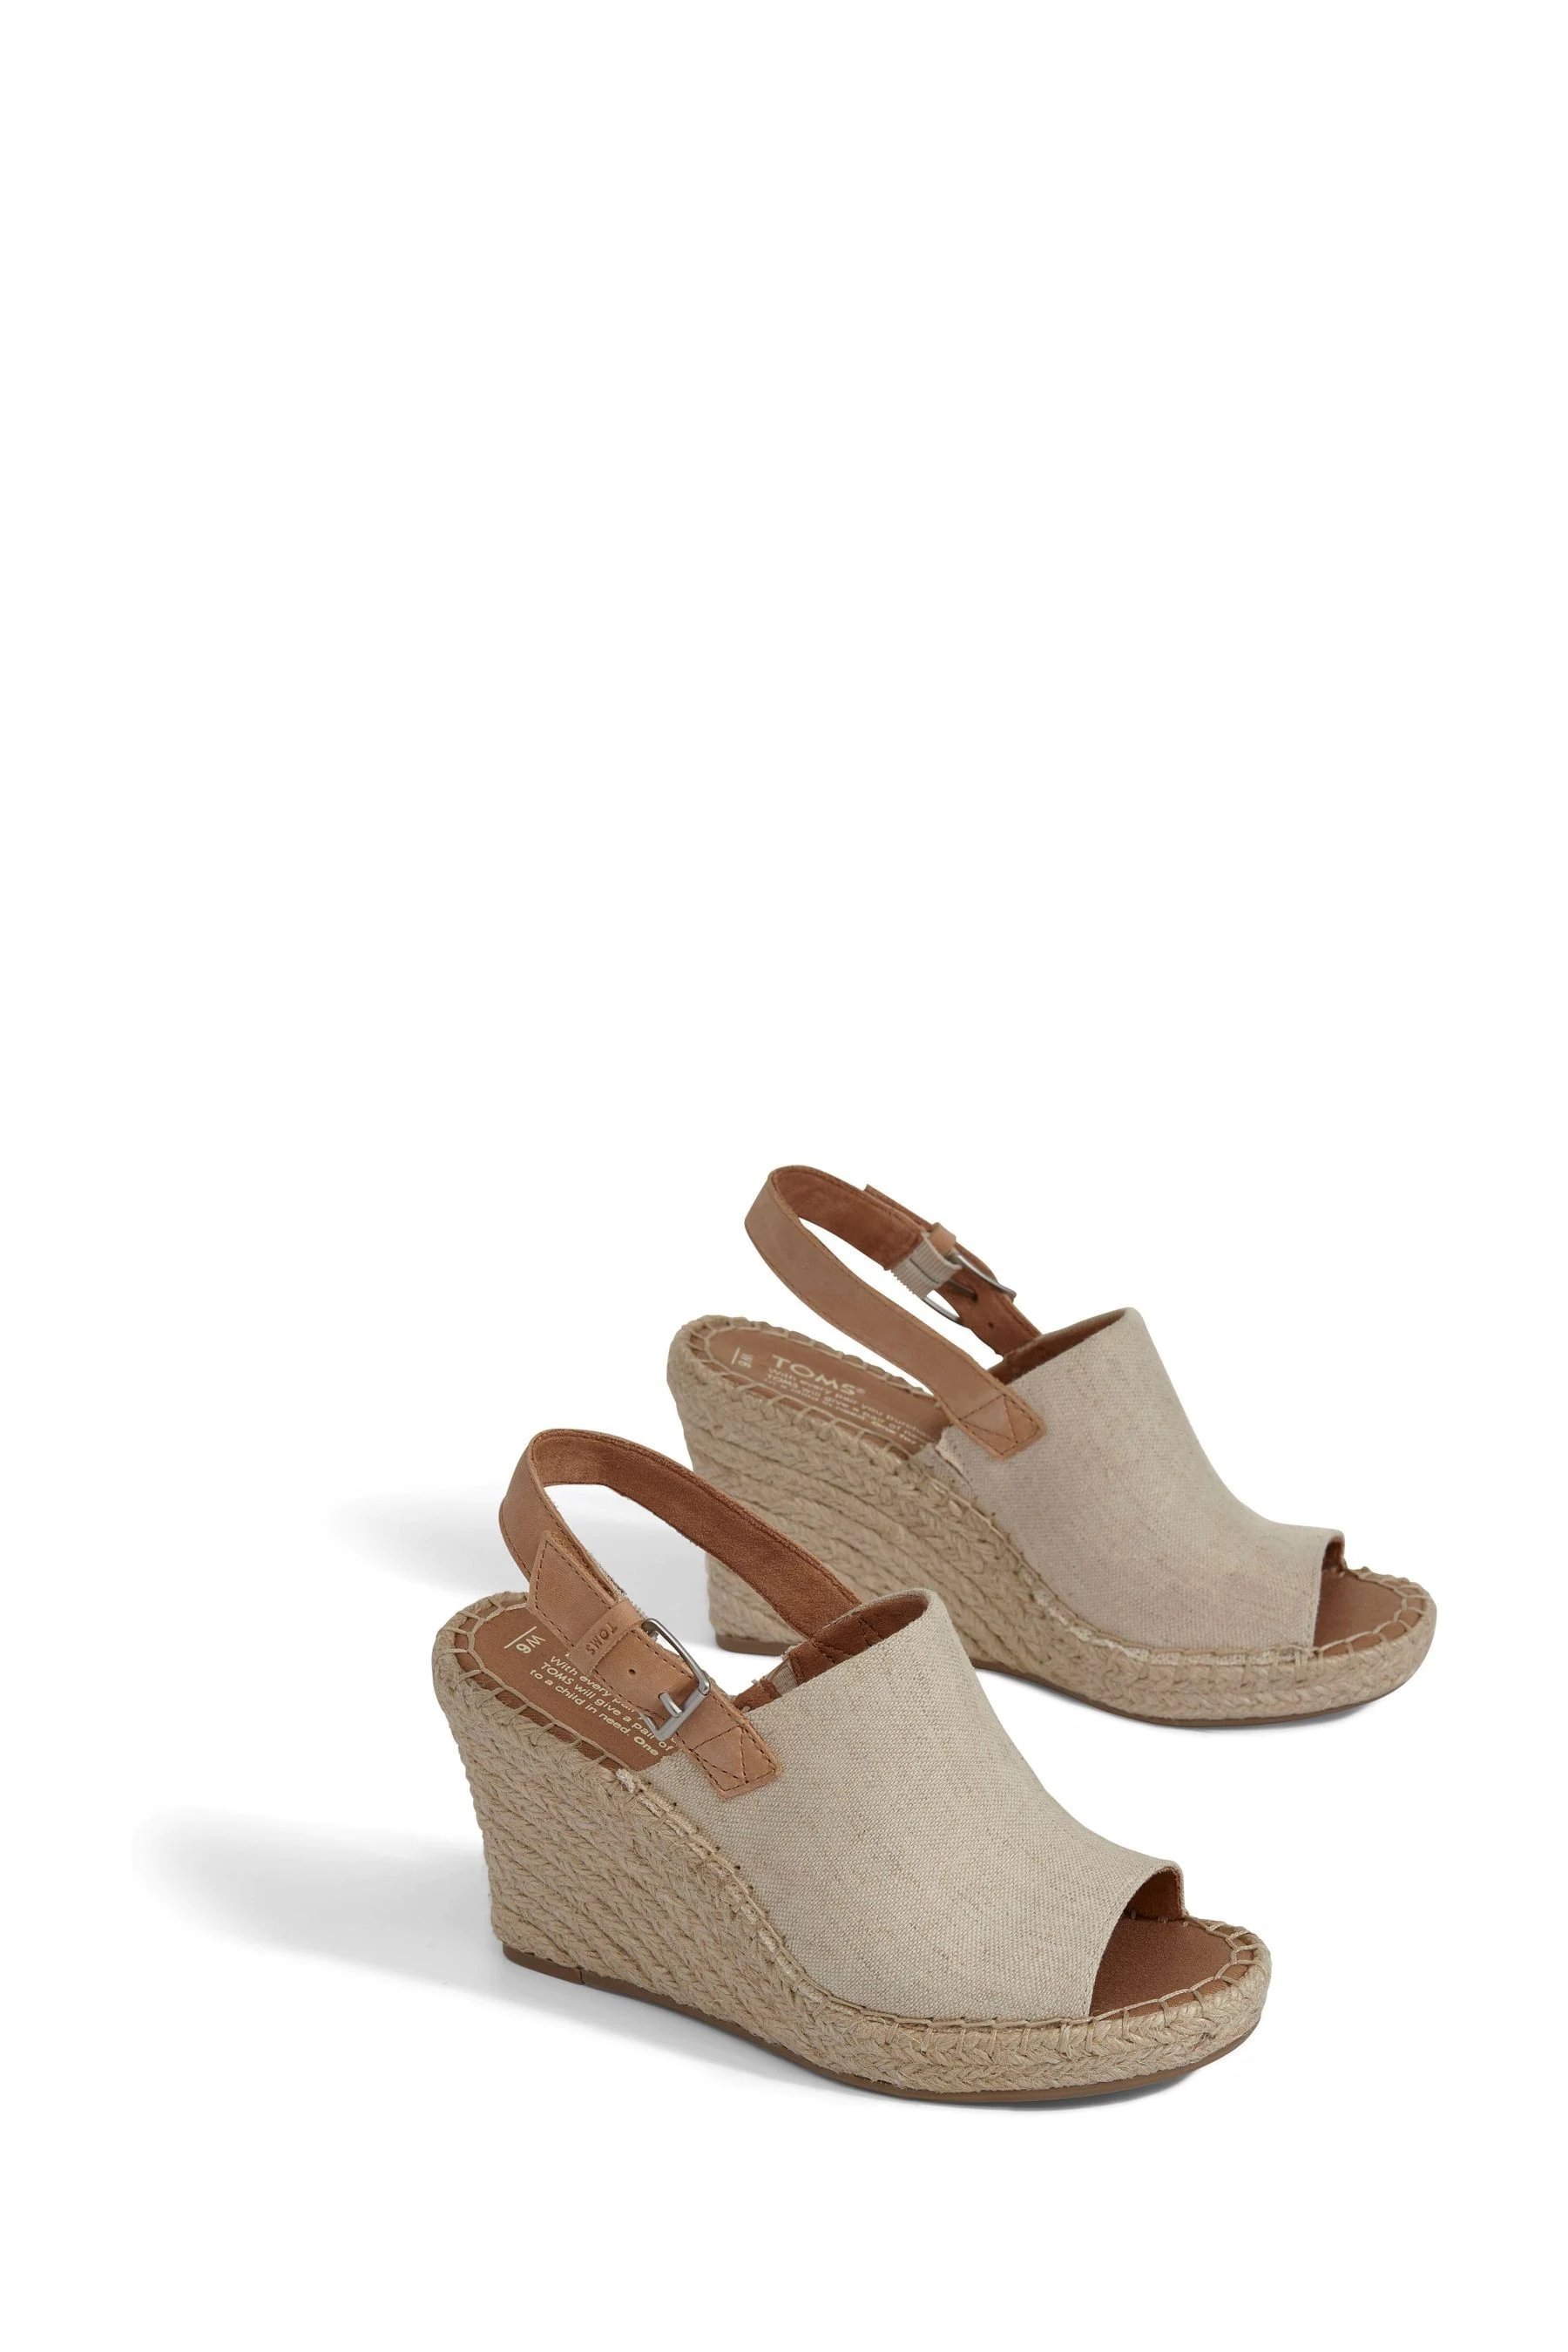 13.TOMS Natural Oxford Leather Monica Sandals €88,